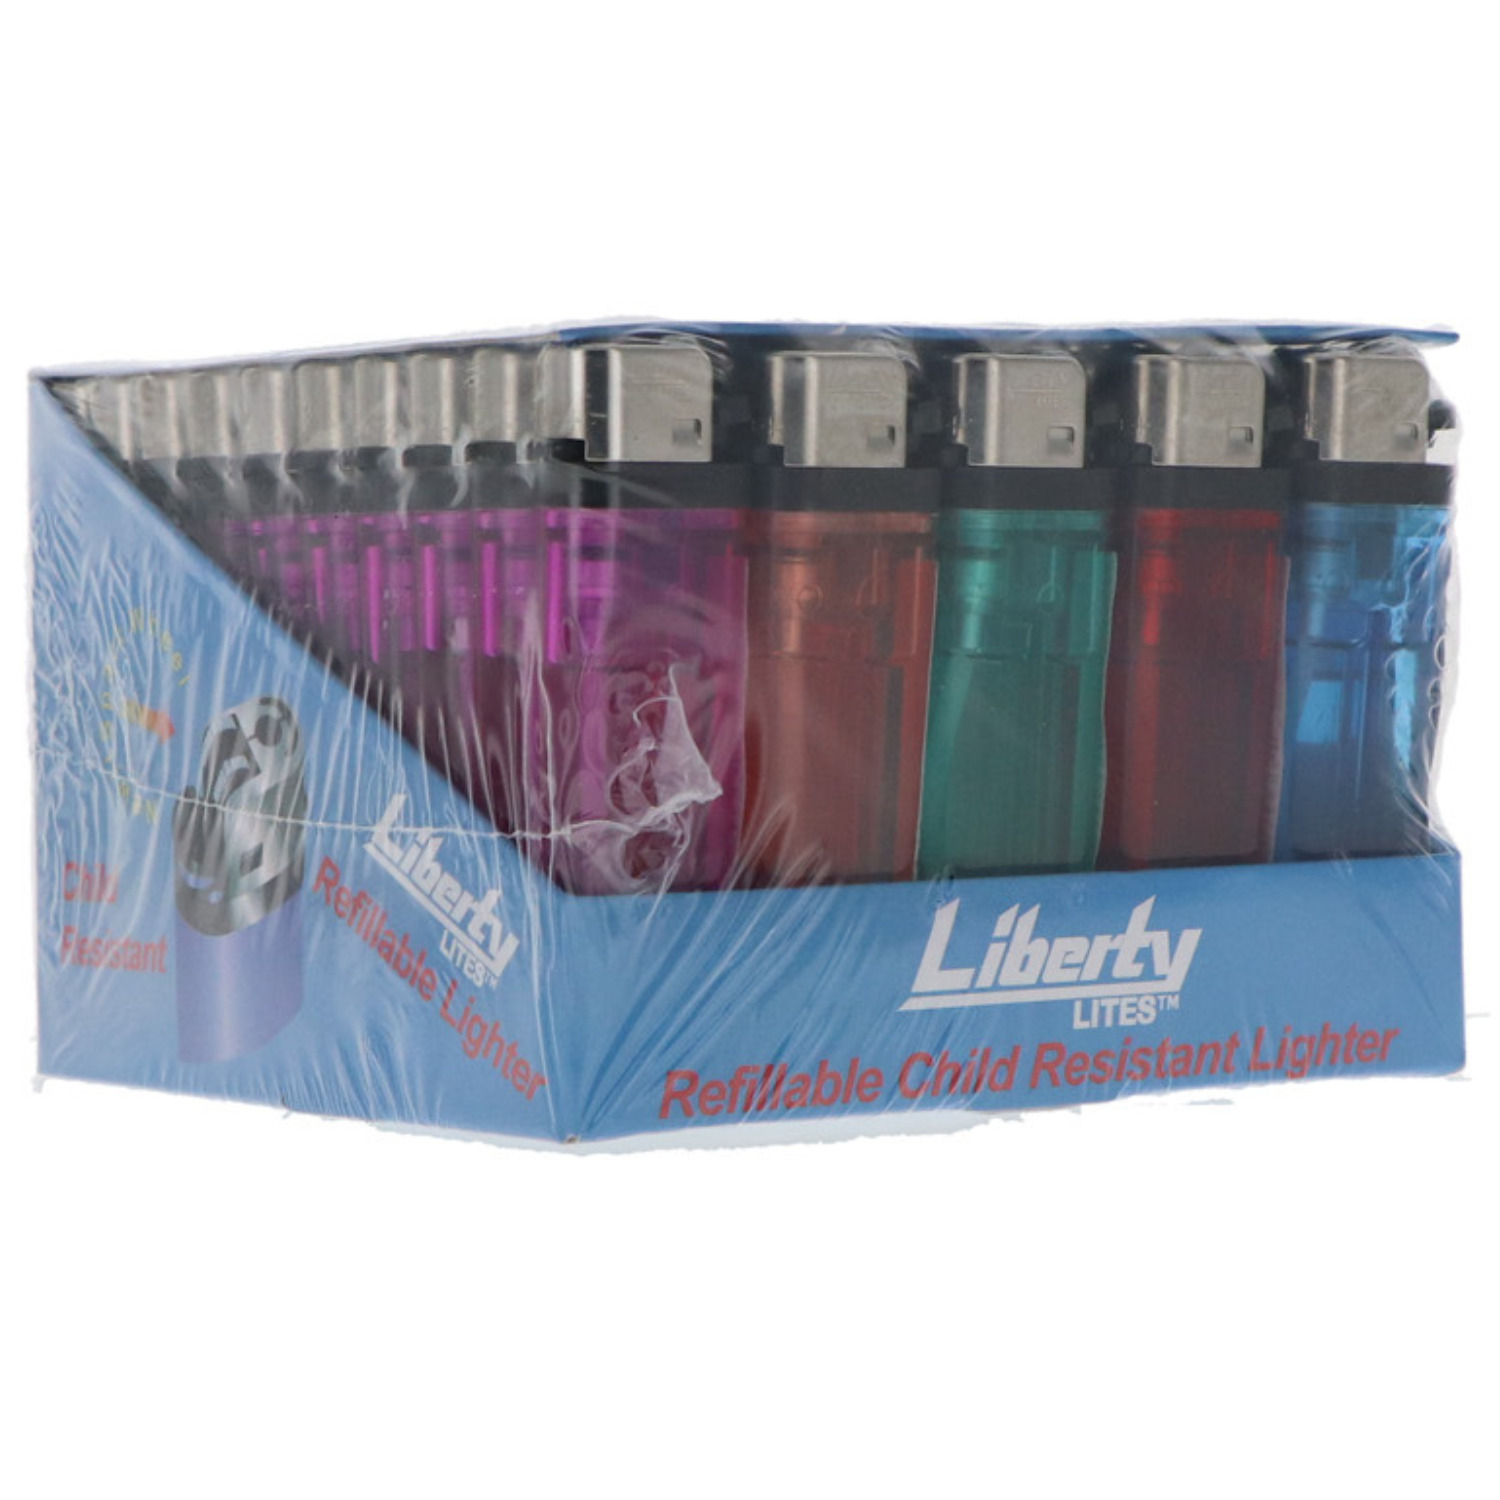 Liberty Disposable Lighter Assorted Colors (packed of 50)